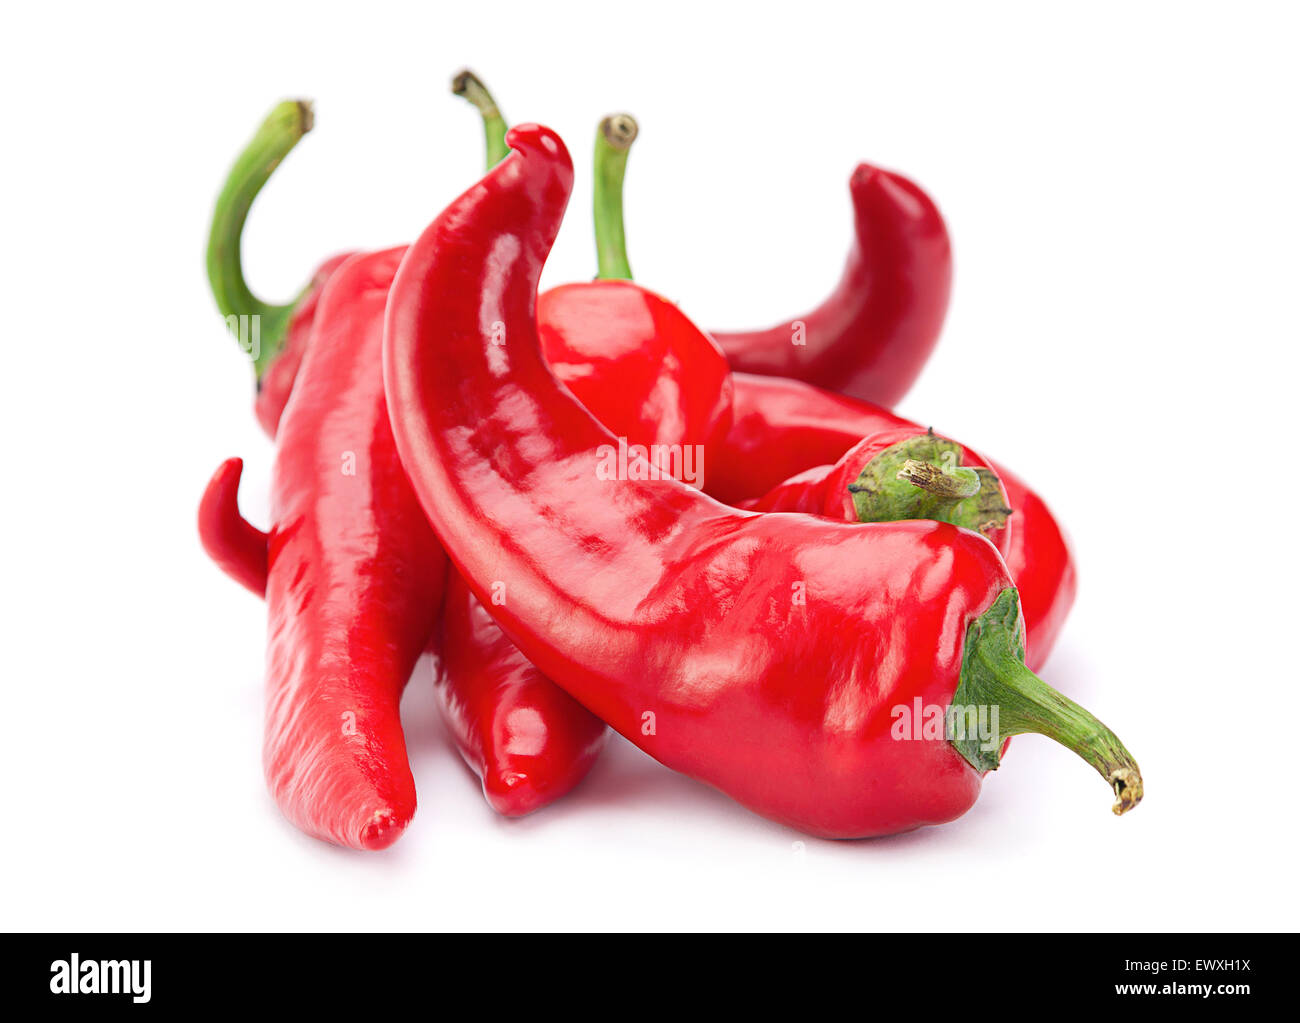 Red chilli pepper isolated on white background Stock Photo